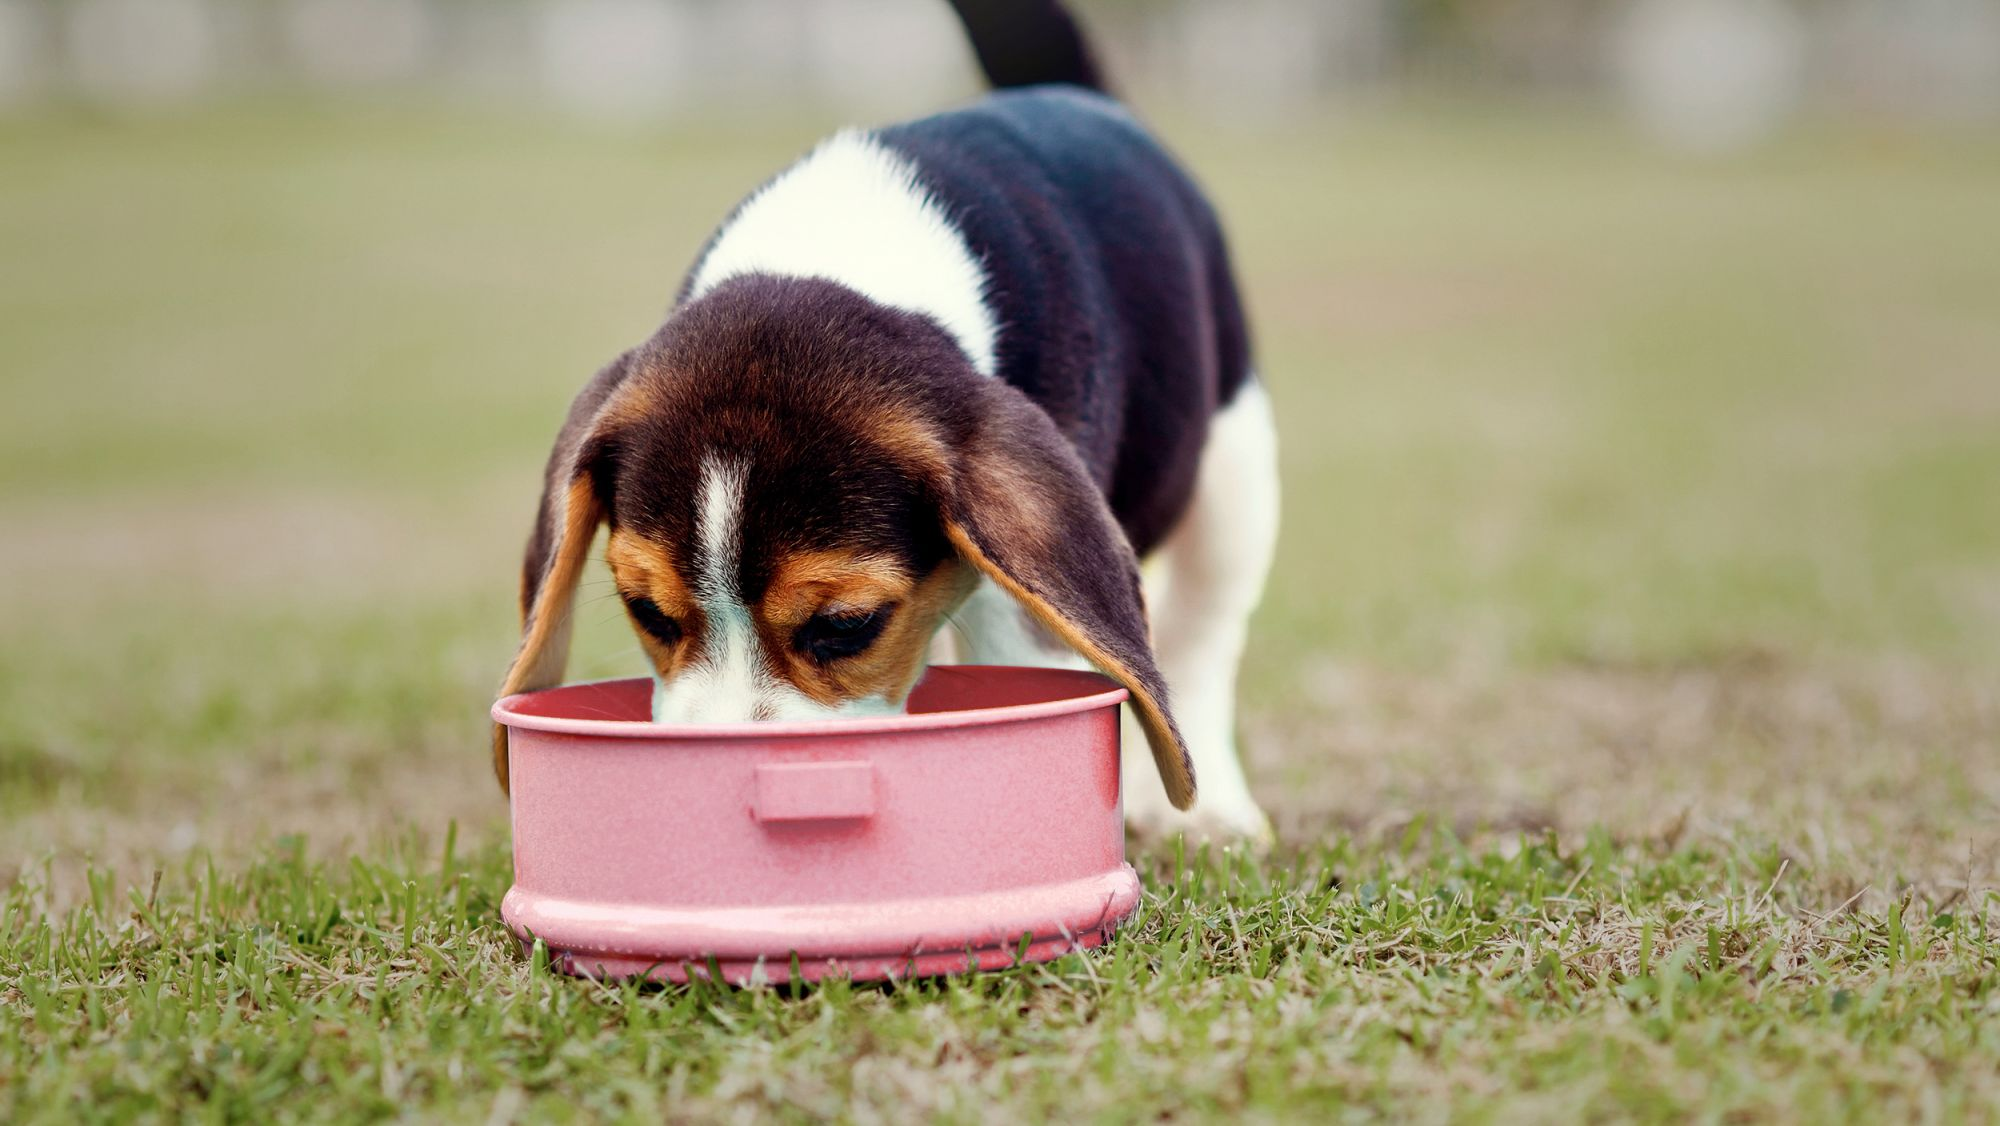 Puppy Beagle standing outside in a garden eating from a small red bowl.